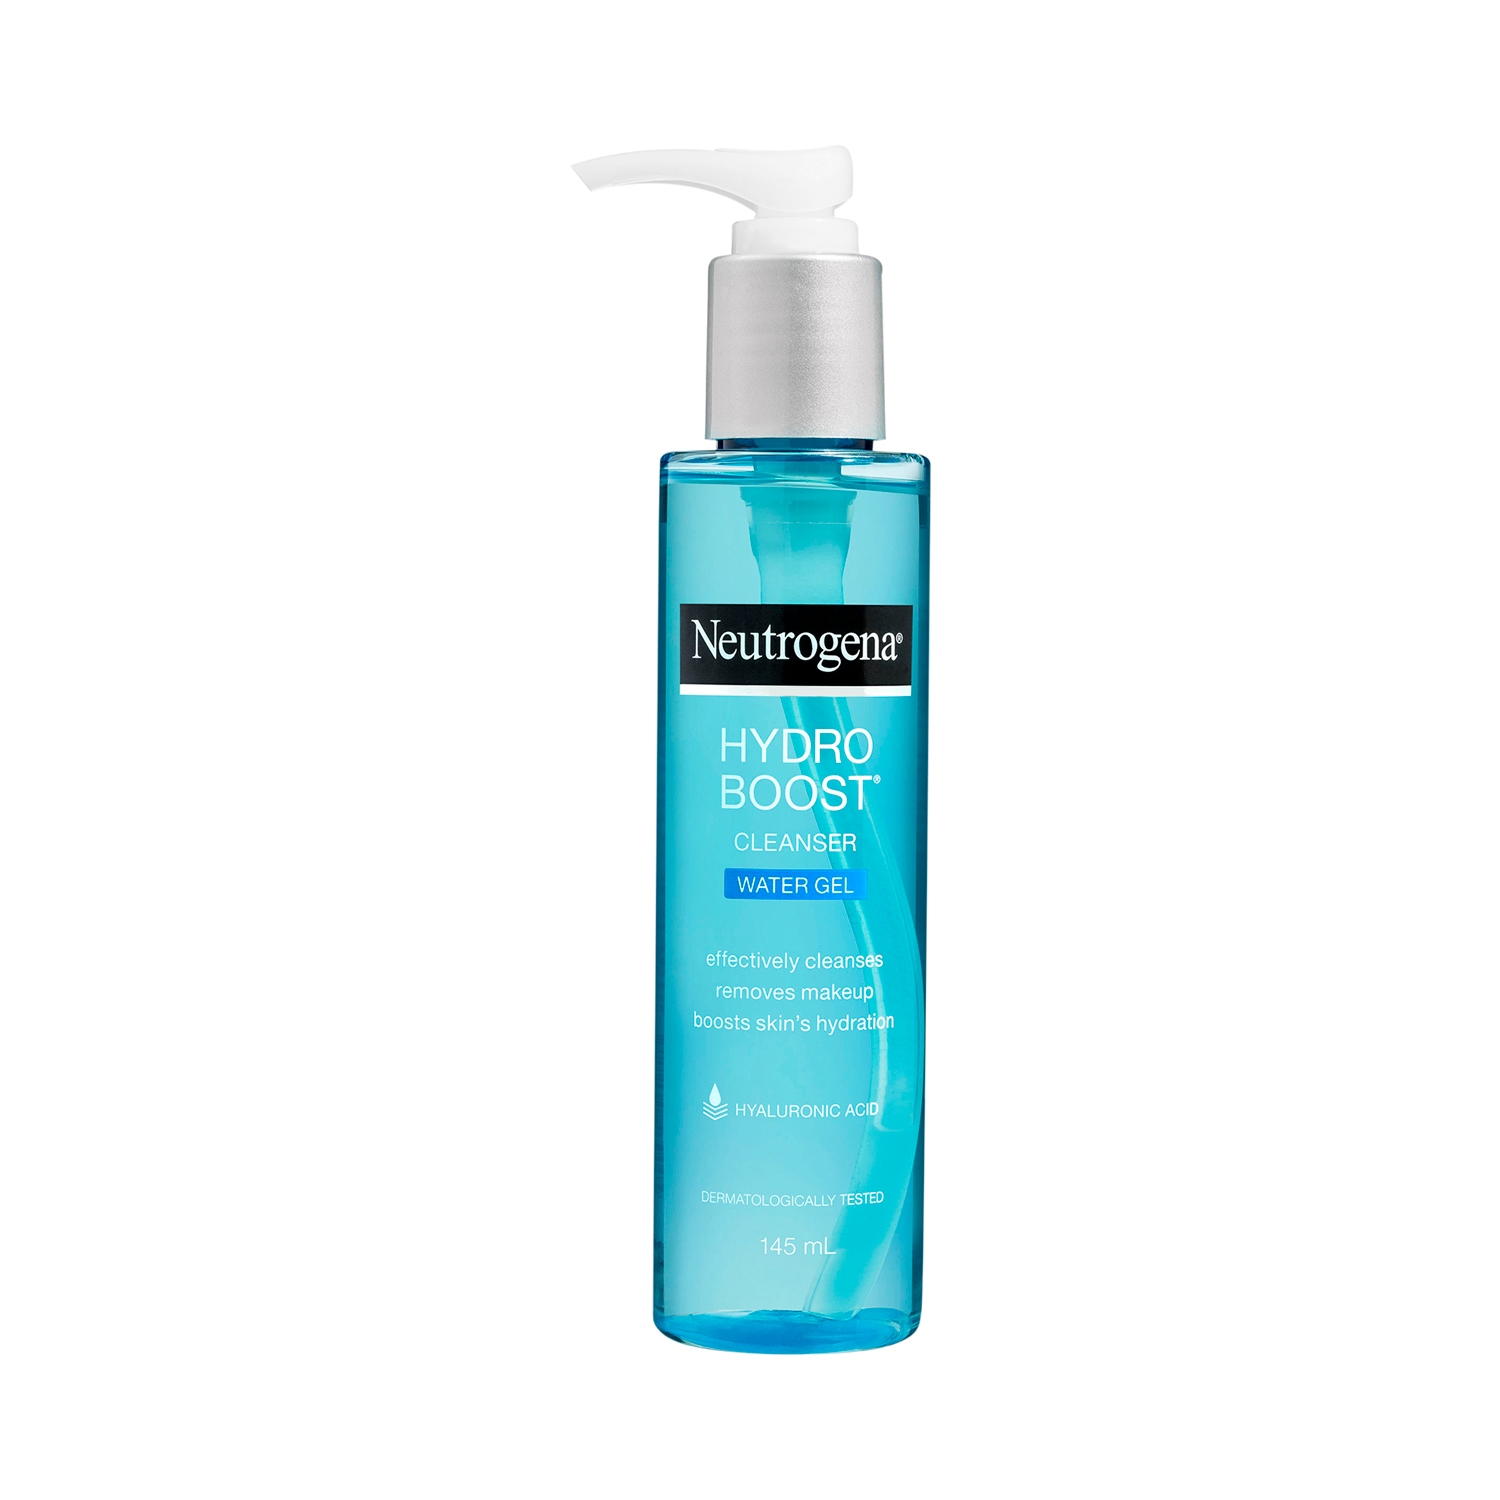 Neutrogena | Neutrogena Hydro Boost Cleanser Water Gel Face Wash with Hyaluronic Acid for 24 Hours Hydration (145ml)